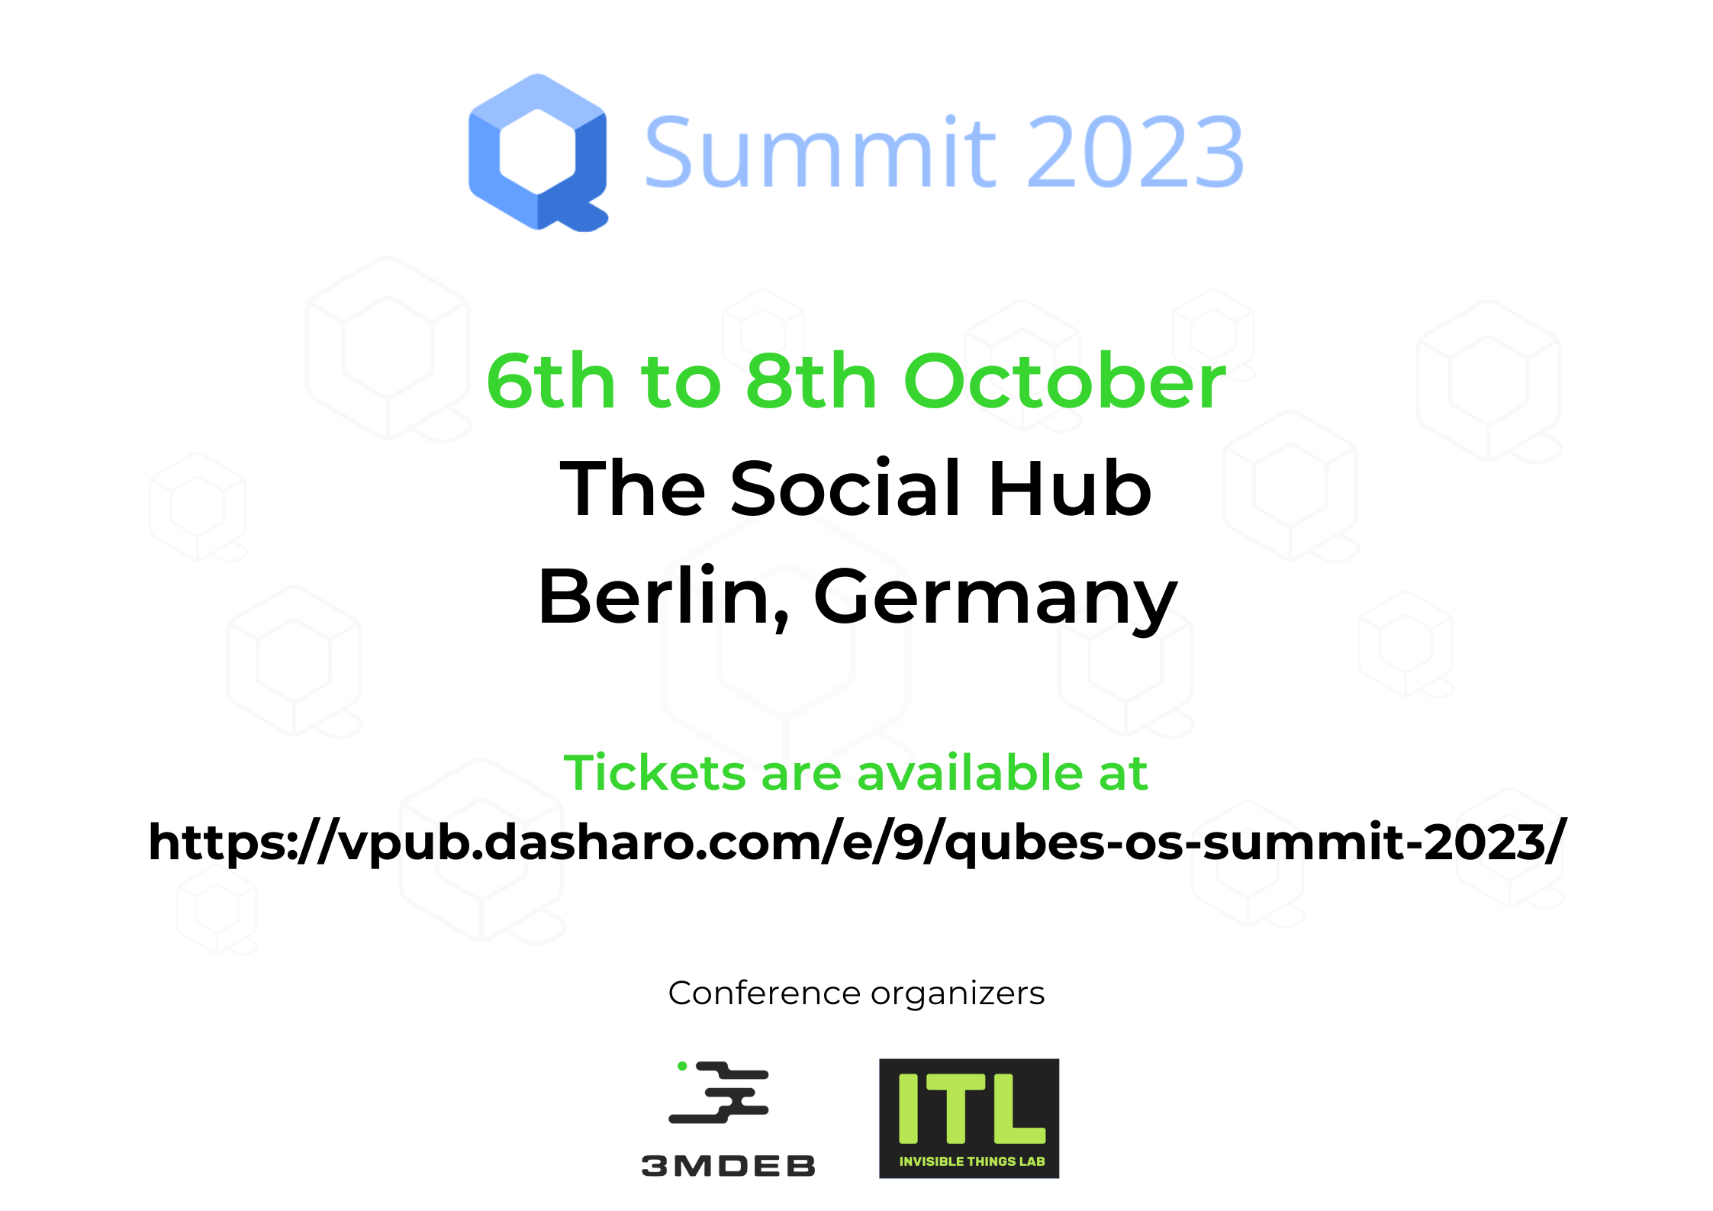 Tickets are available for Qubes OS Summit 2023